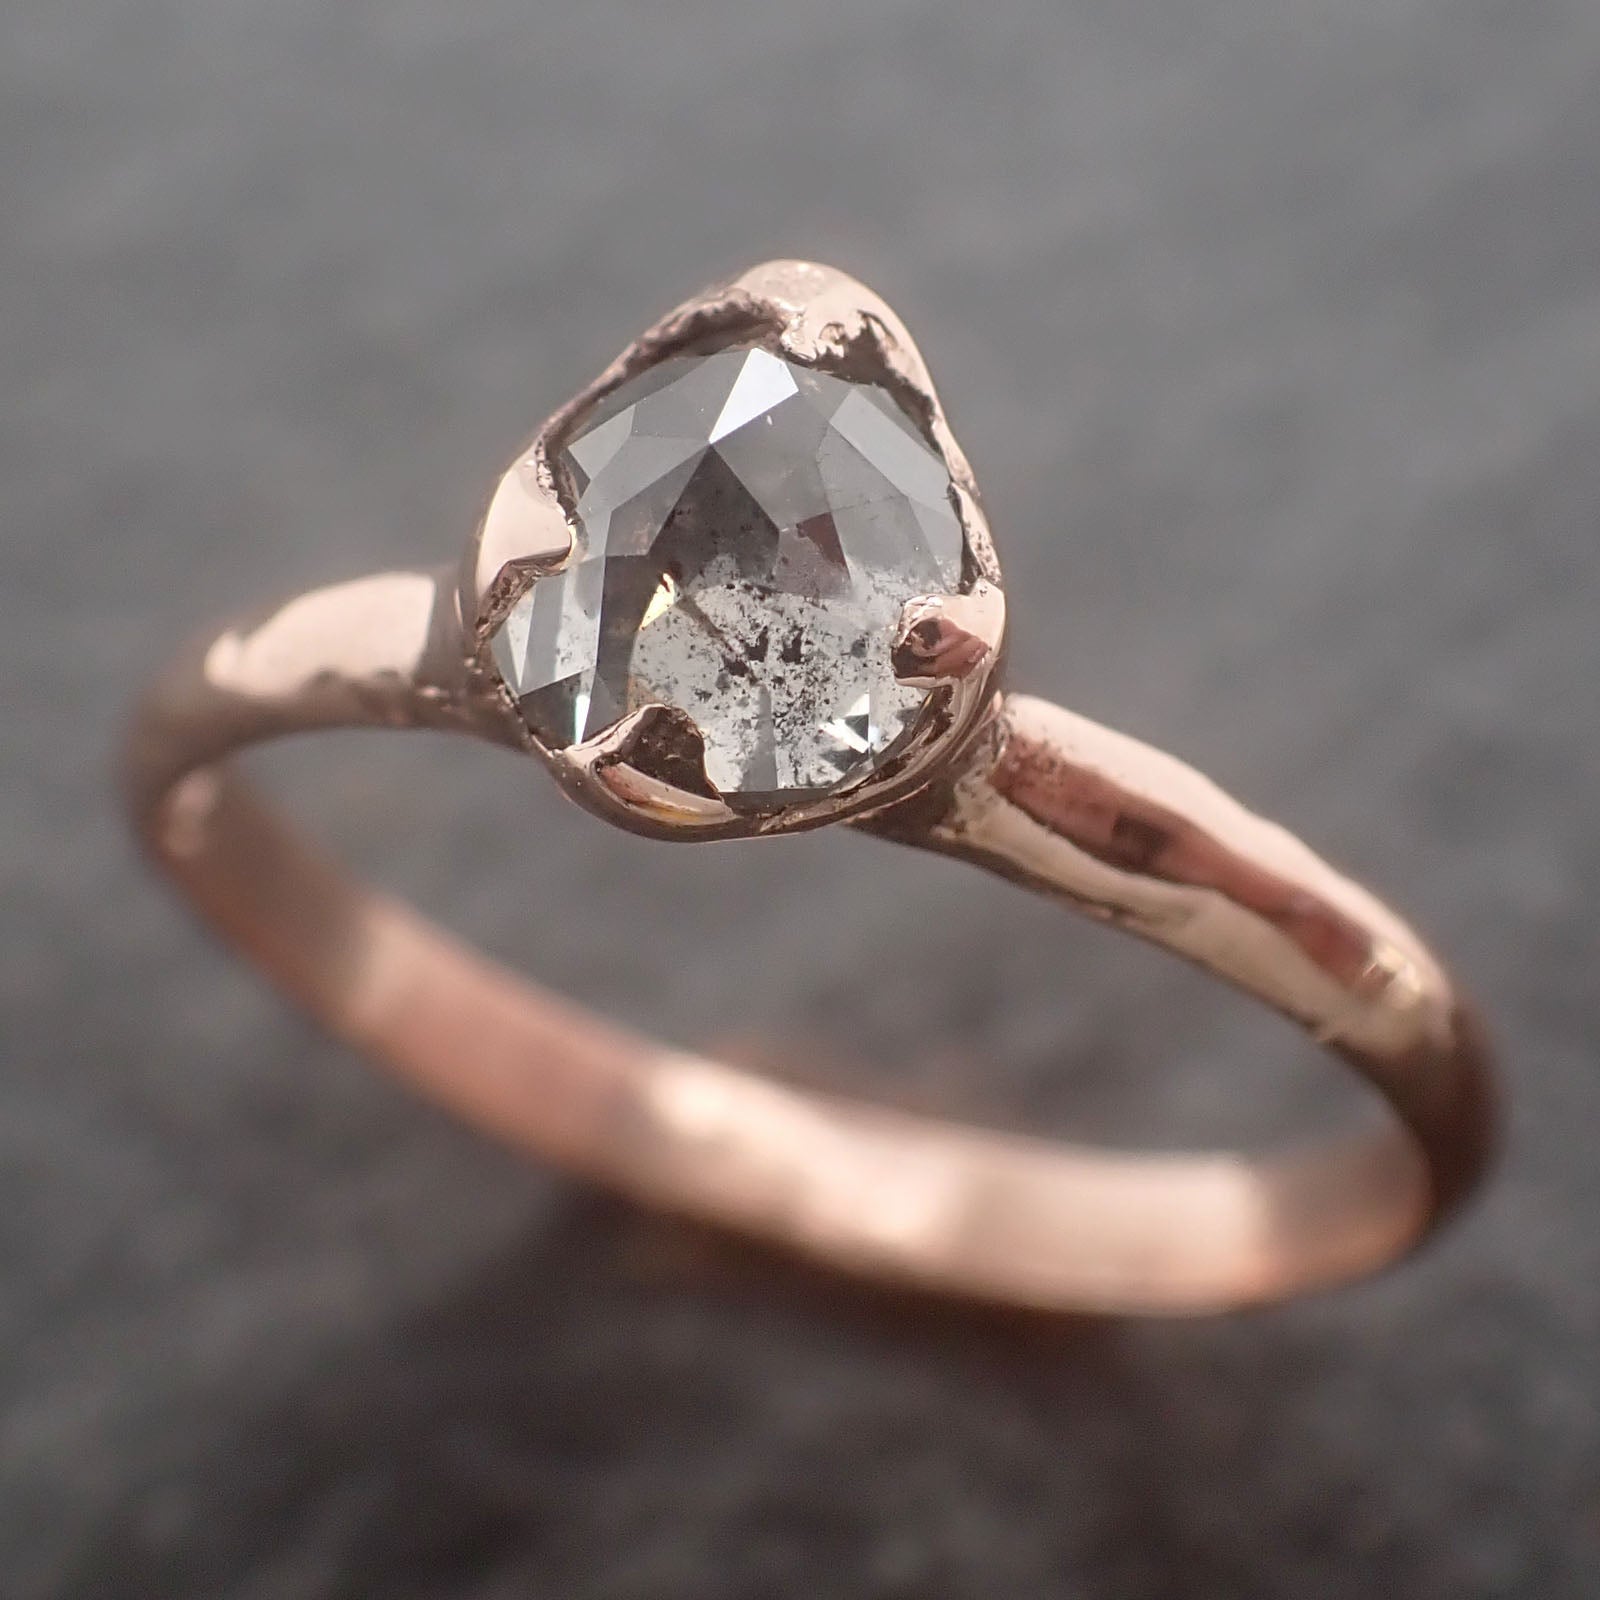 Faceted Fancy cut Salt and Pepper Diamond Solitaire Engagement 14k Rose Gold Wedding Ring byAngeline 2598